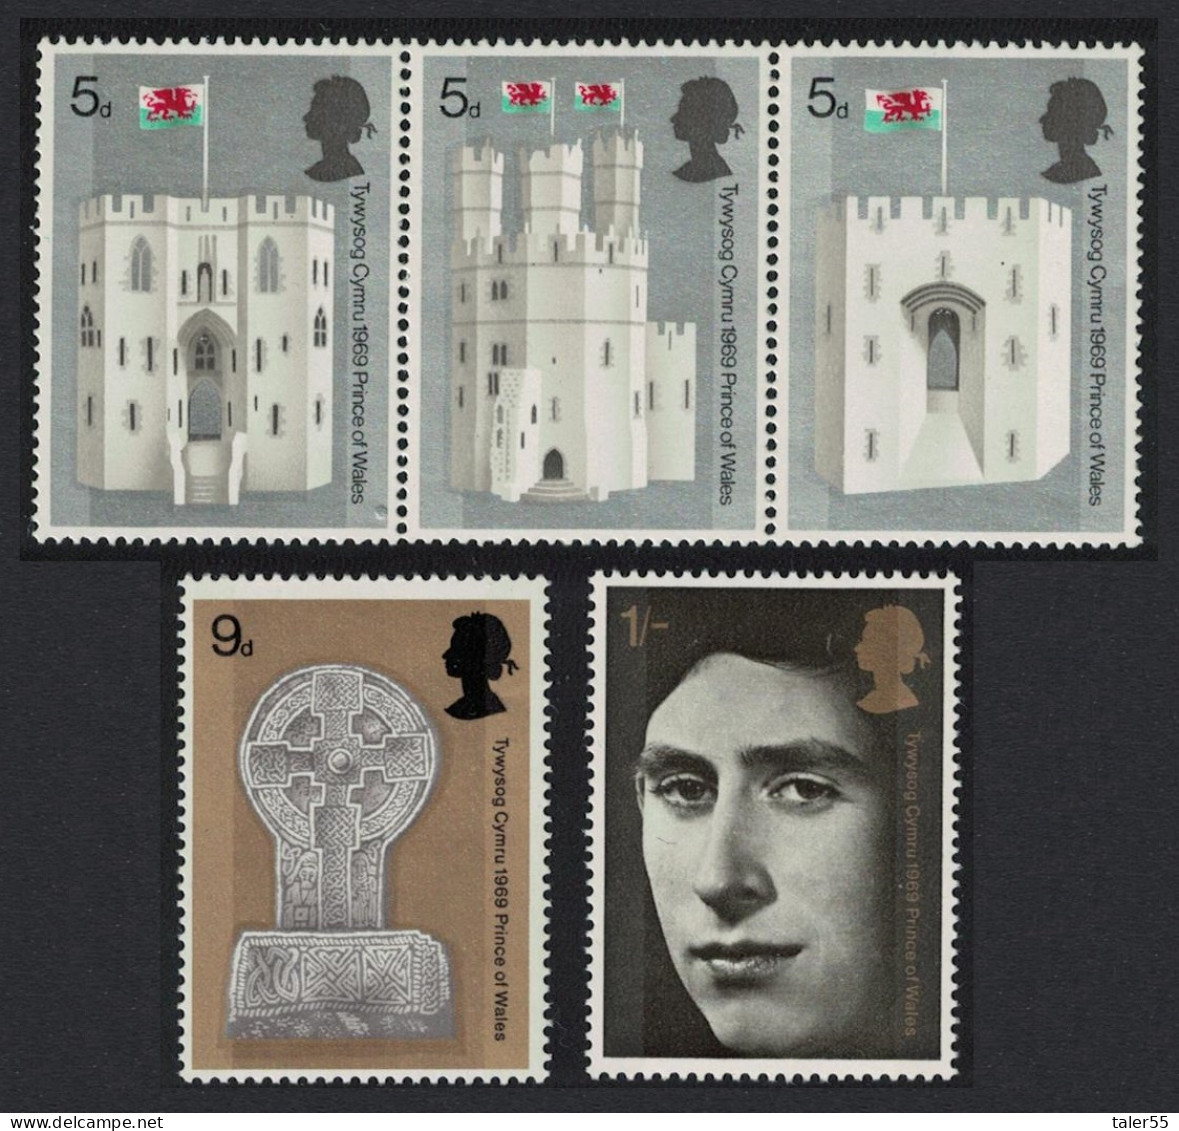 Great Britain Investiture Of The Prince Of Wales 5v 1969 MNH SG#802-806 Sc#597-599 - Ungebraucht